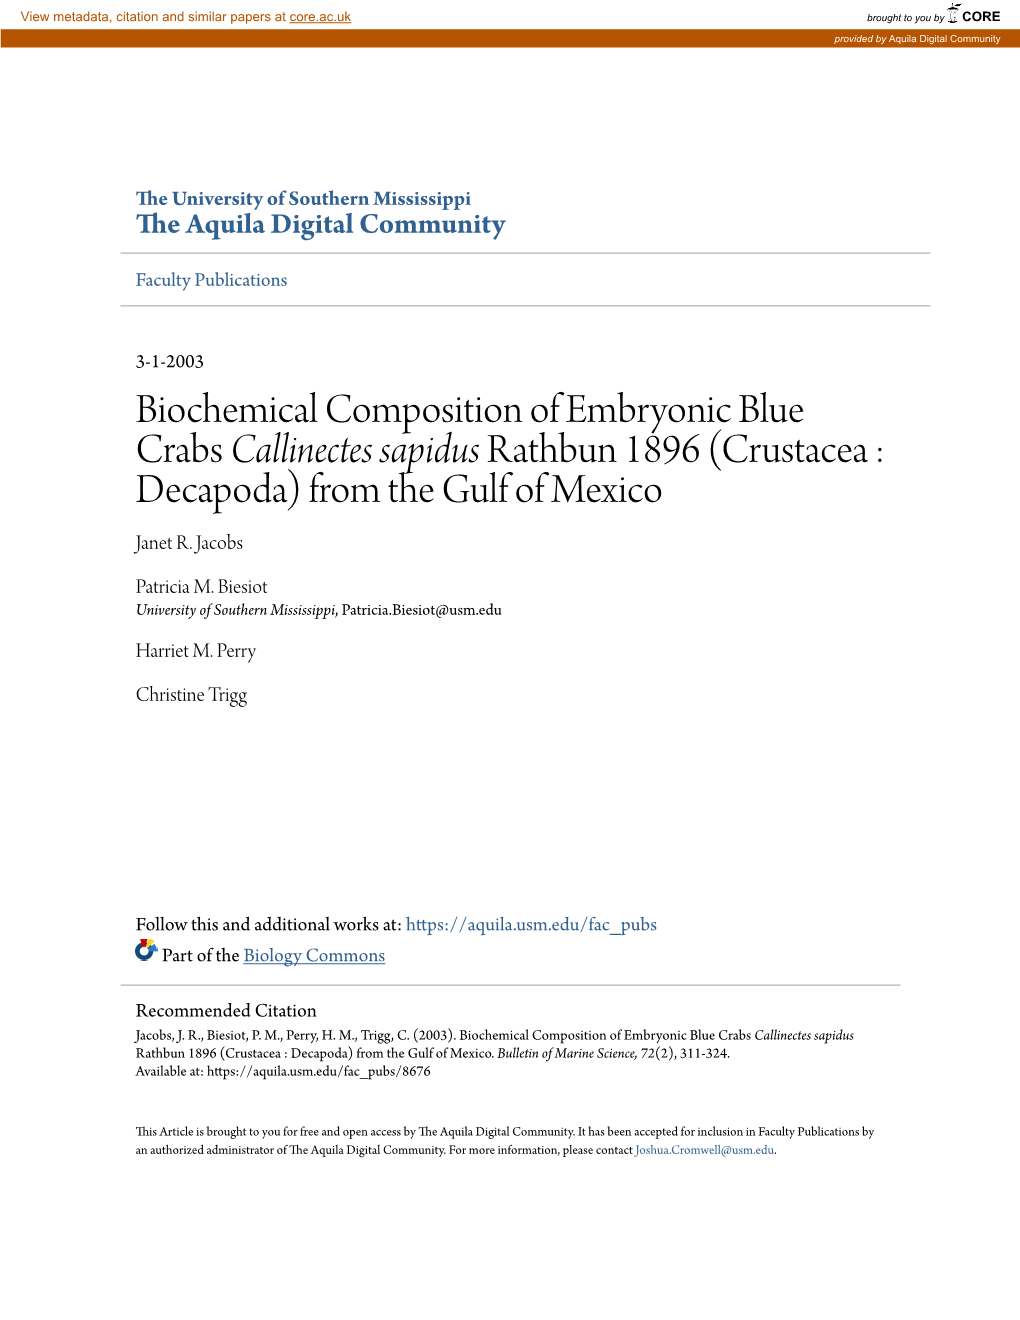 Biochemical Composition of Embryonic Blue Crabs Callinectes Sapidus Rathbun 1896 (Crustacea : Decapoda) from the Gulf of Mexico Janet R